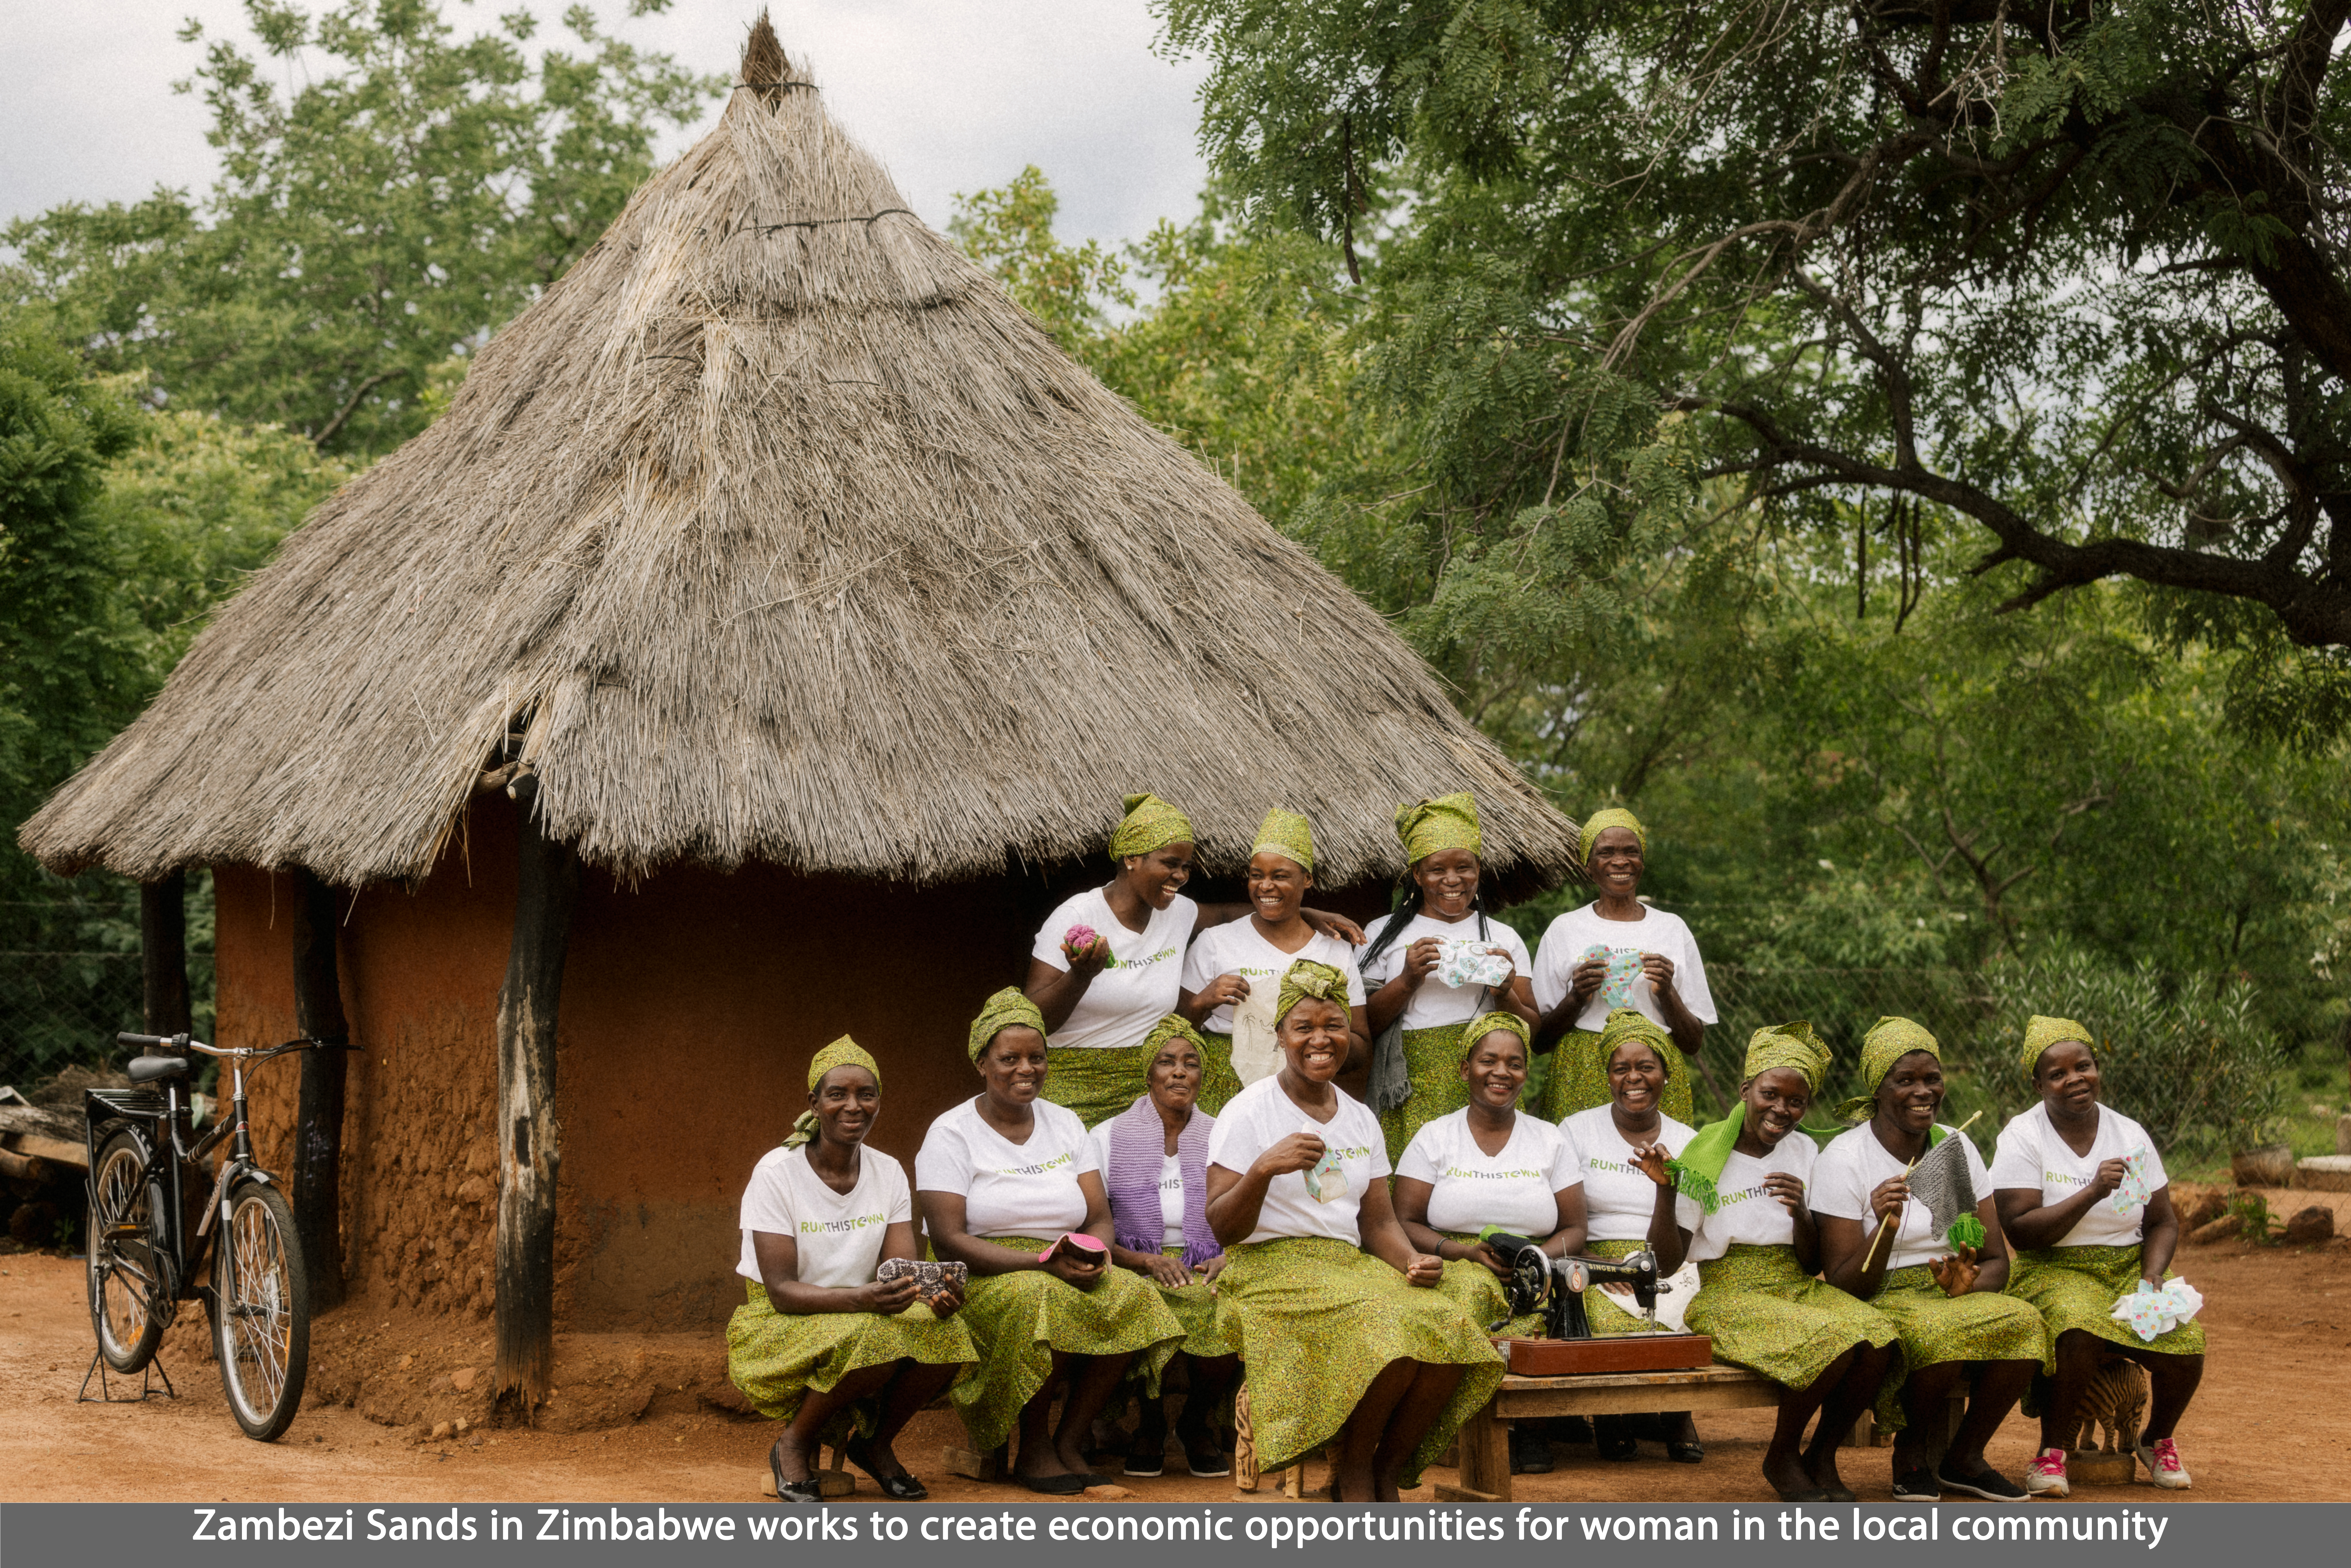 Zambezi Sands in Zimbabwe works to create economic opportunities for woman in the local community